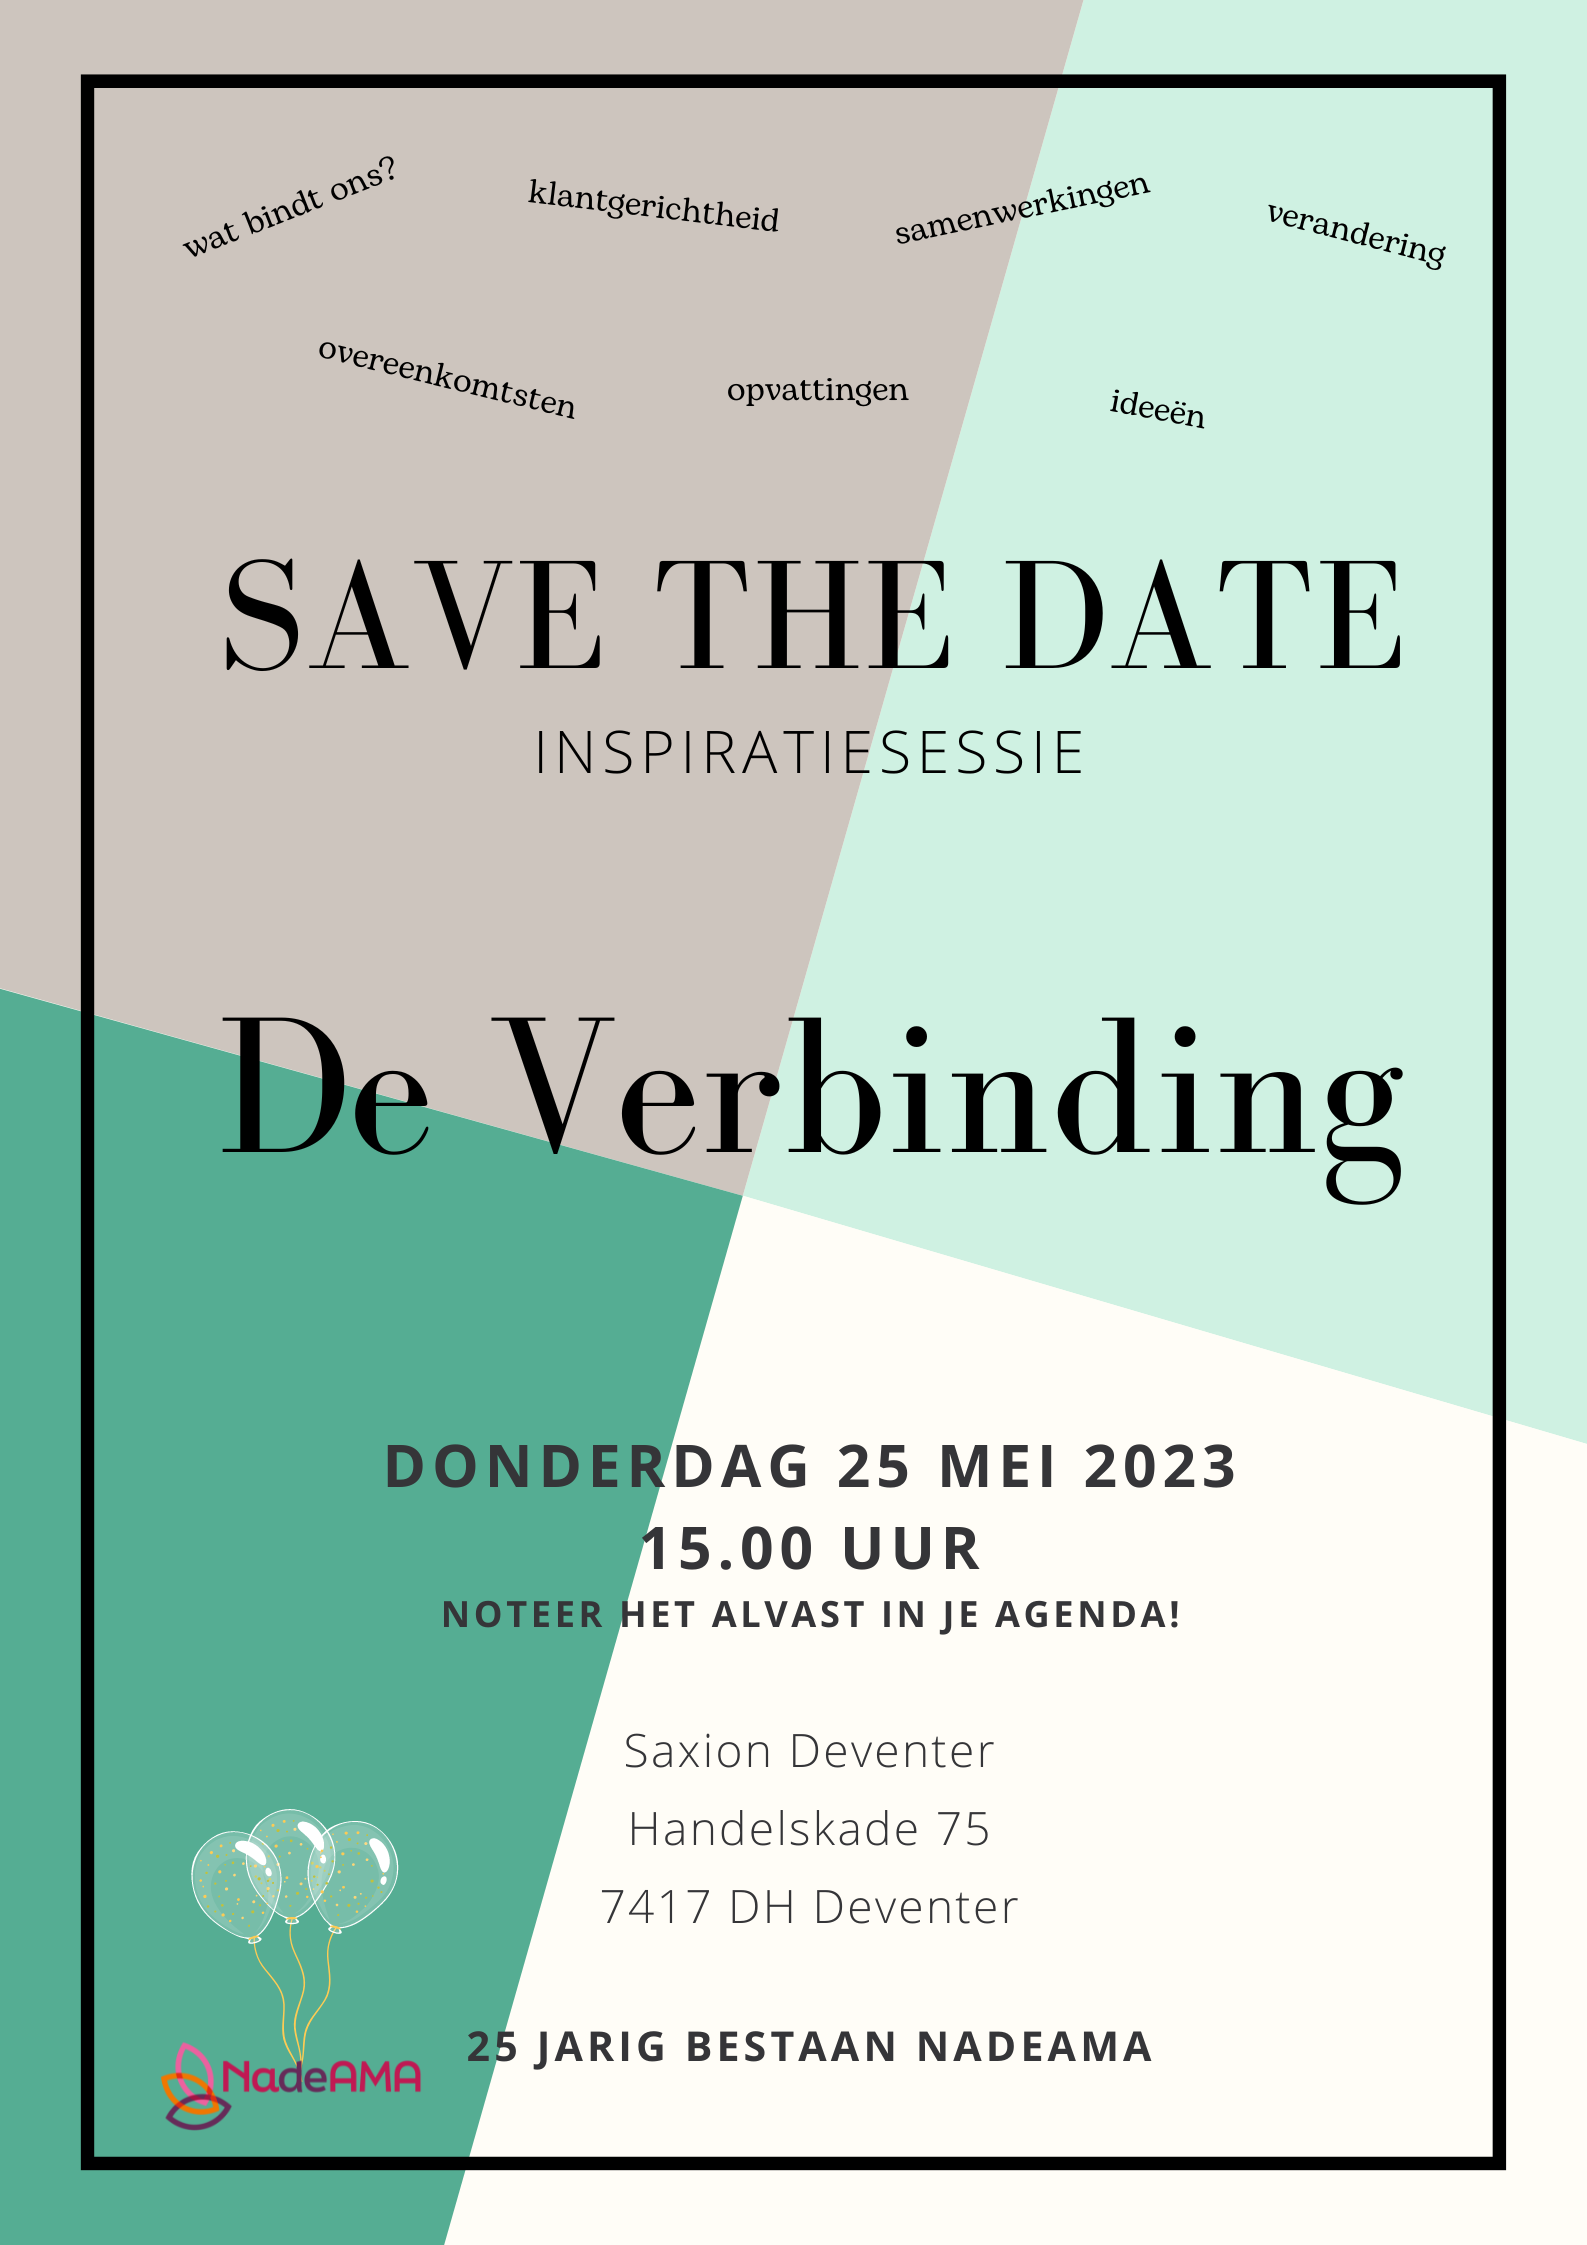 Save the date 25 mei 2023 Thema Verbinding